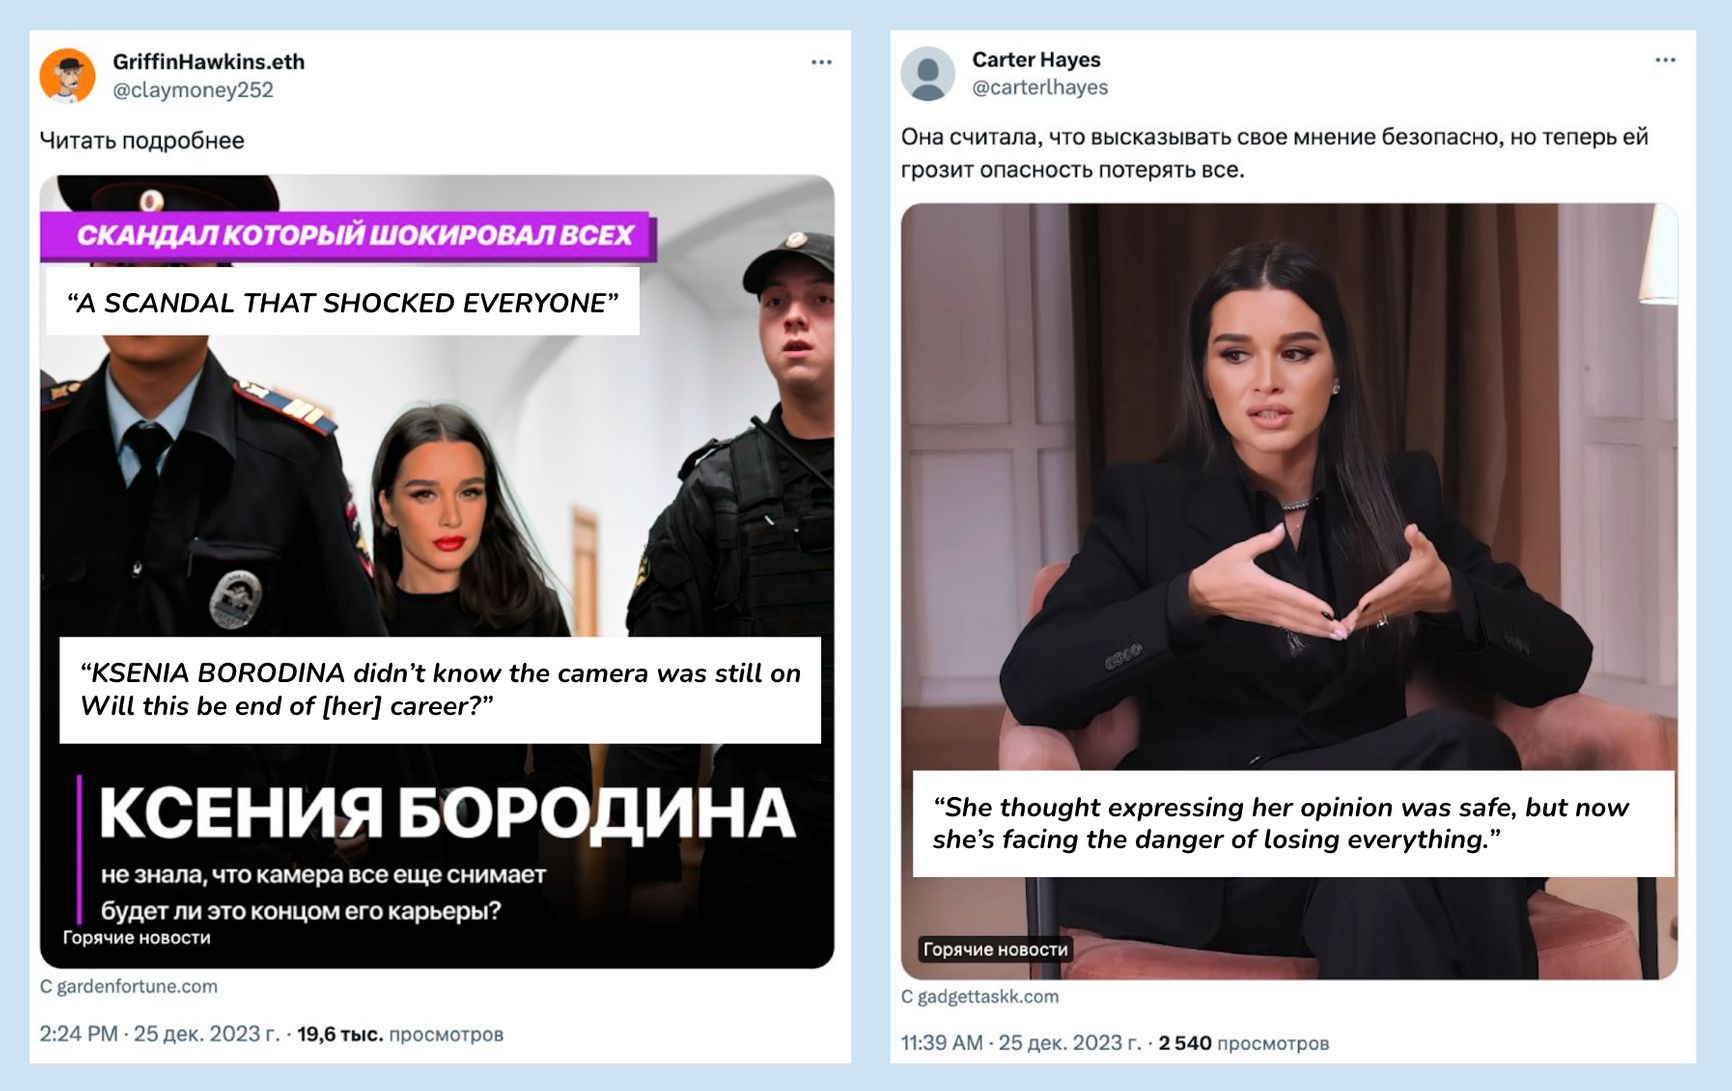 Screenshots of Russian-language tweets about celebrity Ksenia Borodina that contain links to phishing websites